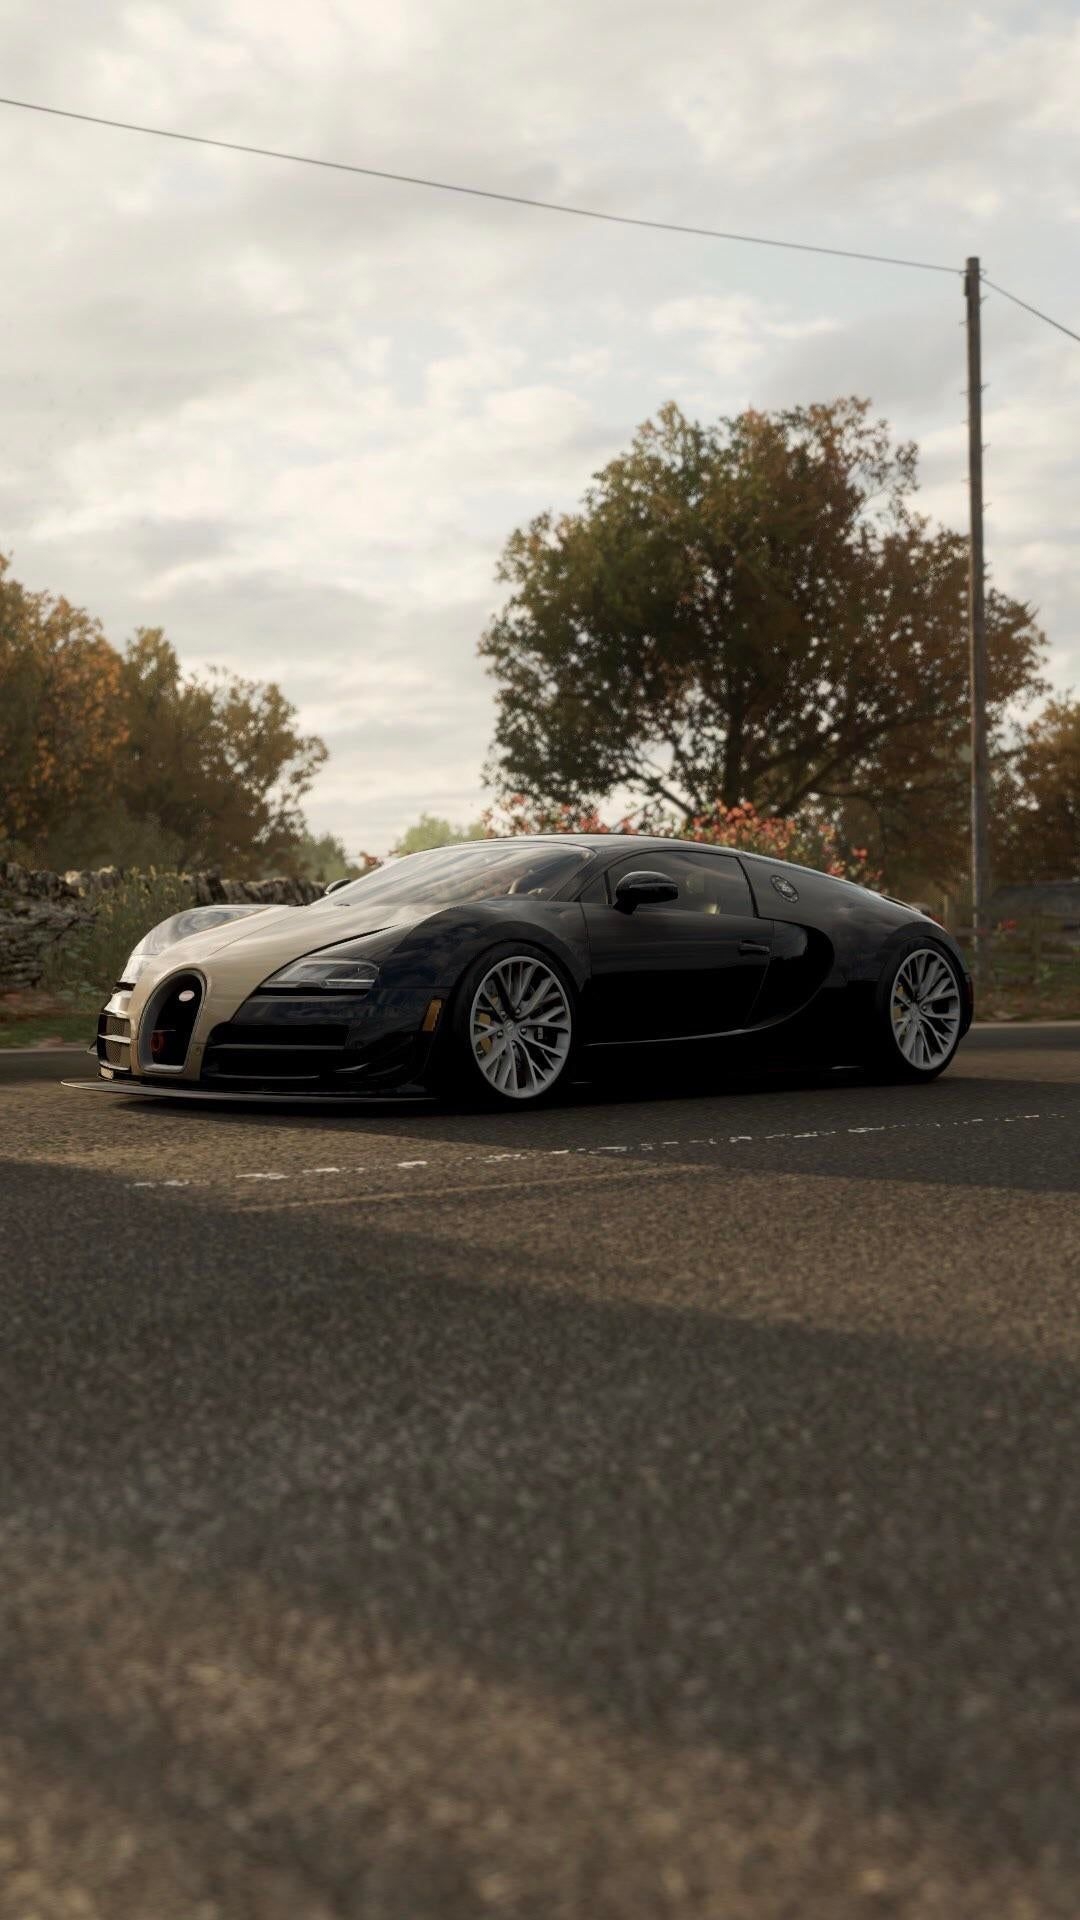 Bugatti Veyron, Best background download, Impressive wallpapers, Top 40 selection, 1080x1920 Full HD Phone